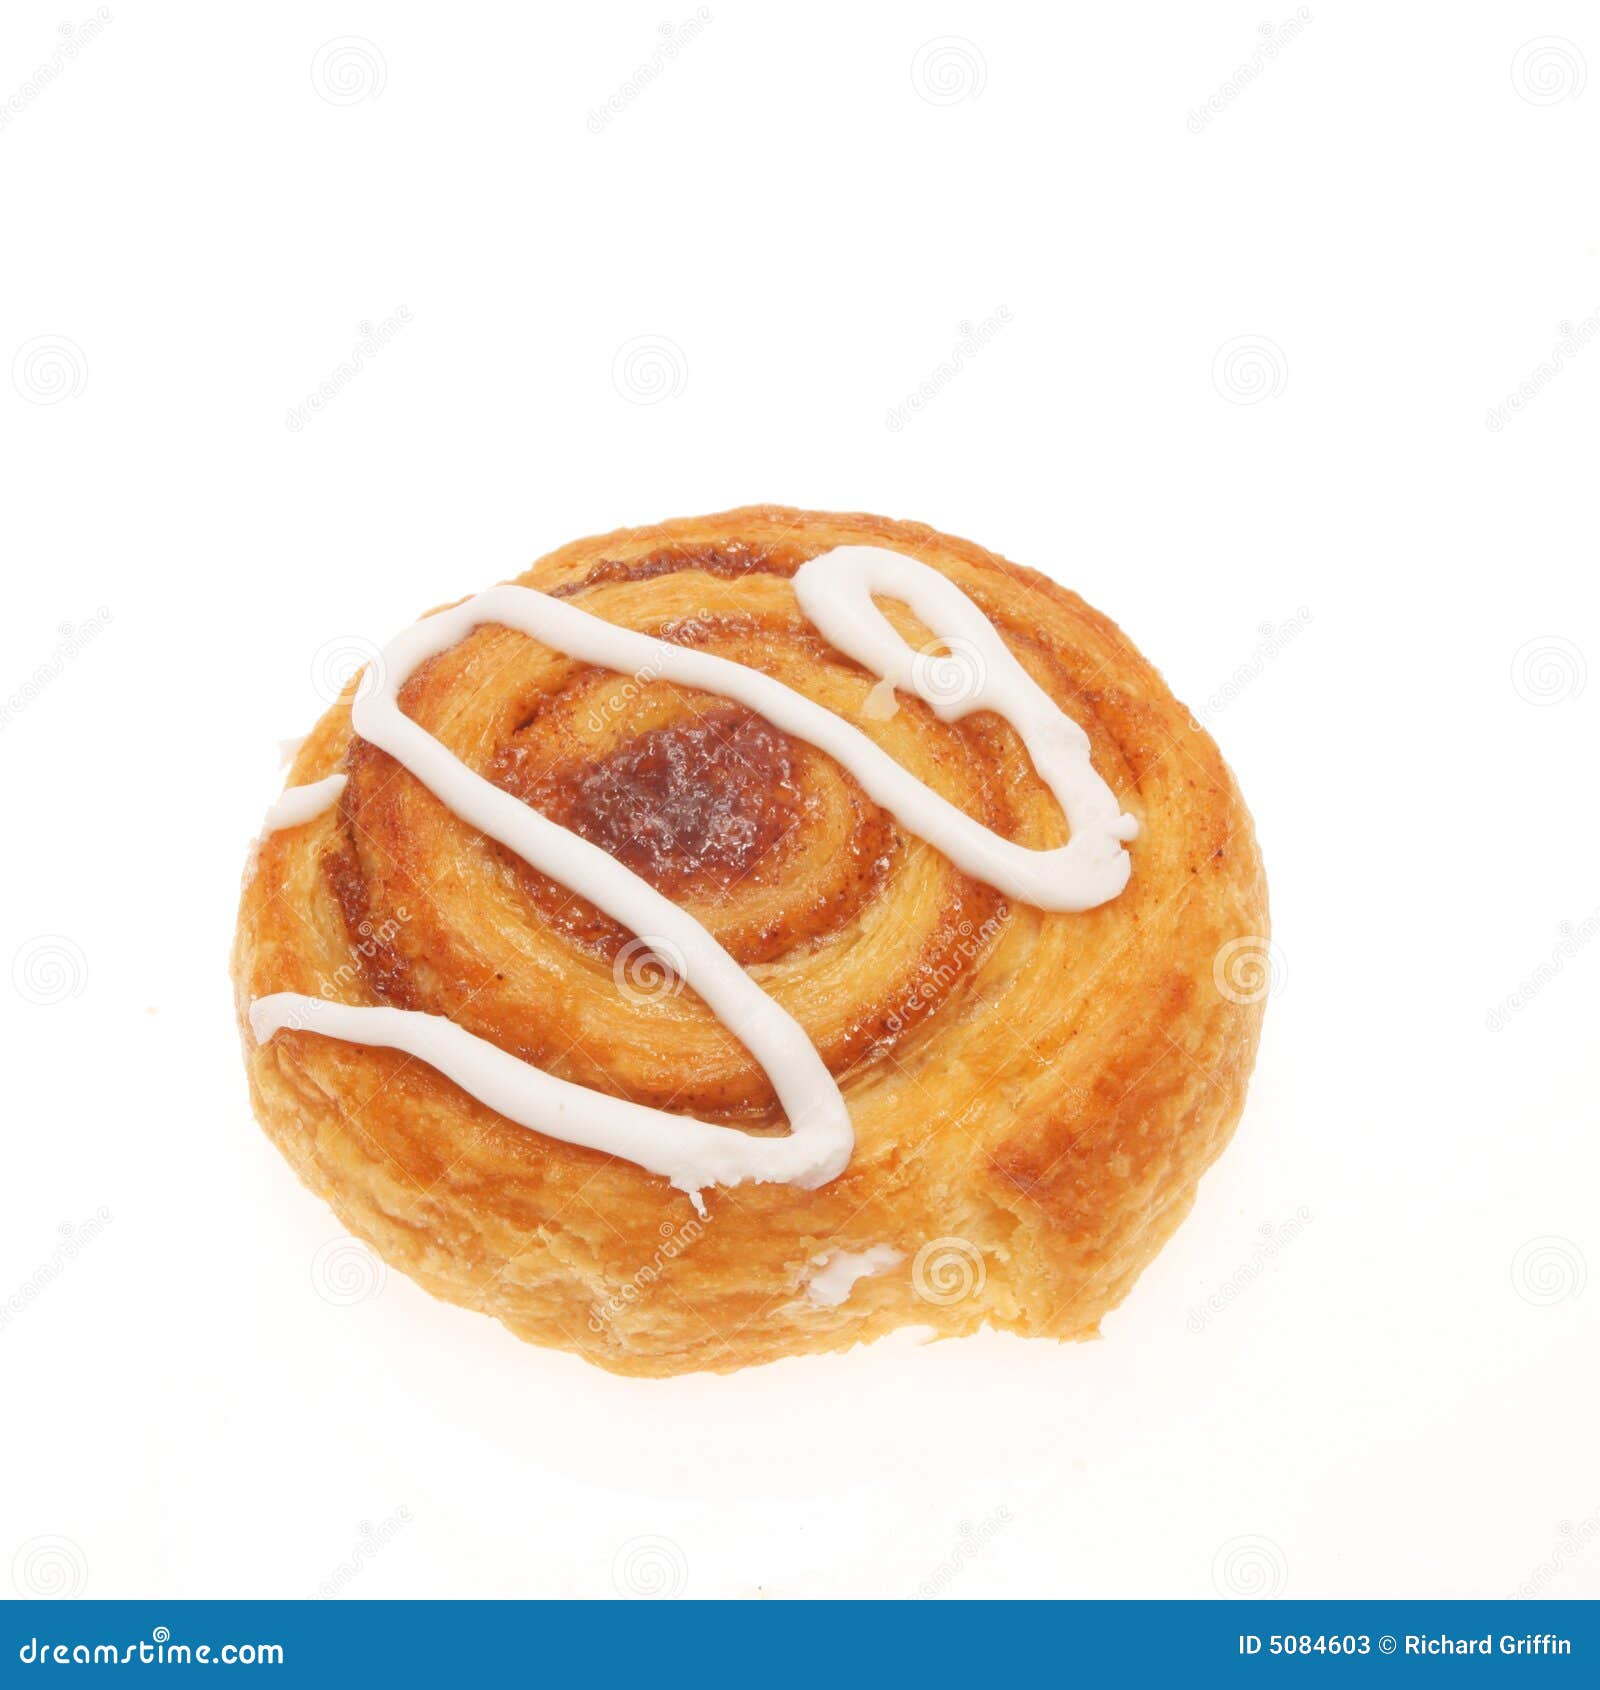 coiled danish pastry